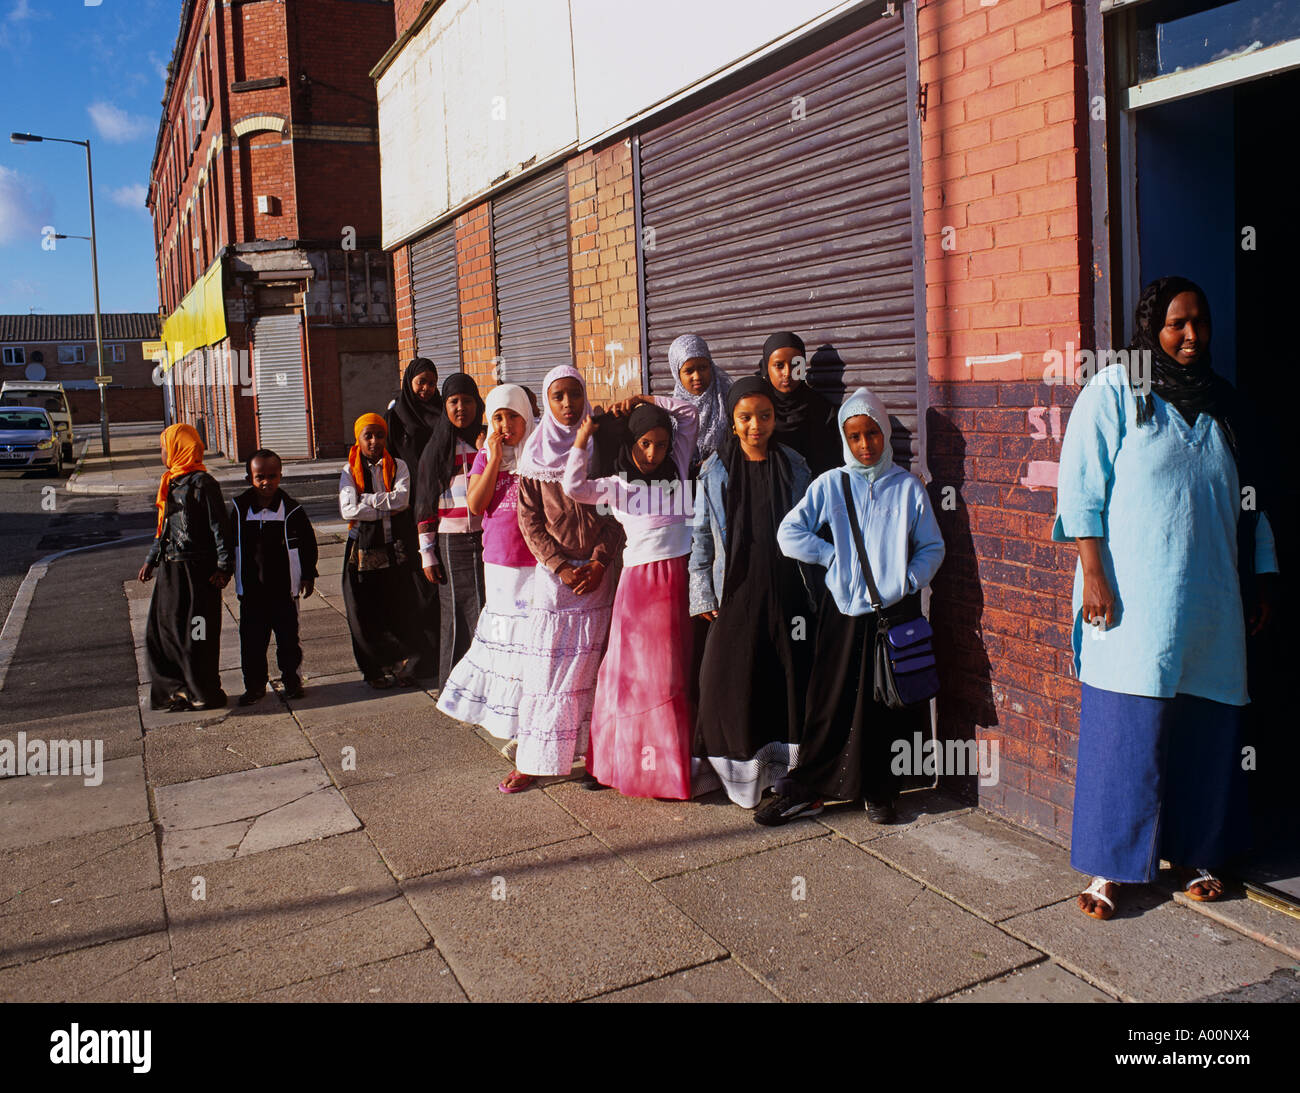 Muslin children queuing for specialist education in Somali Community, Toxteth, Liverpool, UK Stock Photo